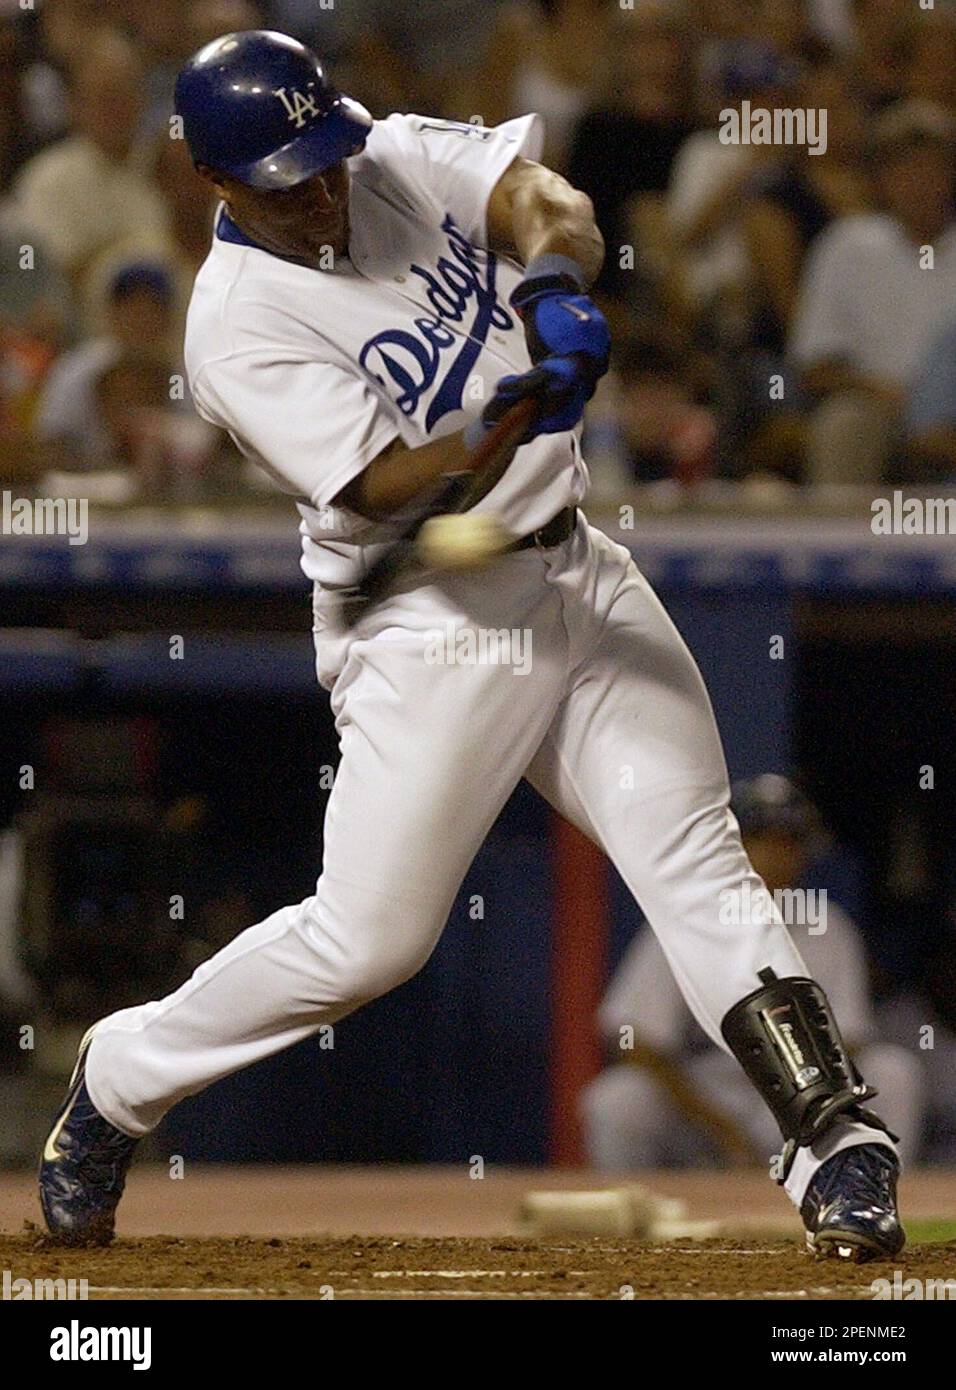 Los Angeles Dodgers' Adrian Beltre hits a three-run home run off St. Louis  Cardinals pitcher Jason Marquis in the third inning at Dodger Stadium in  Los Angeles on Friday, Sept. 10, 2004.